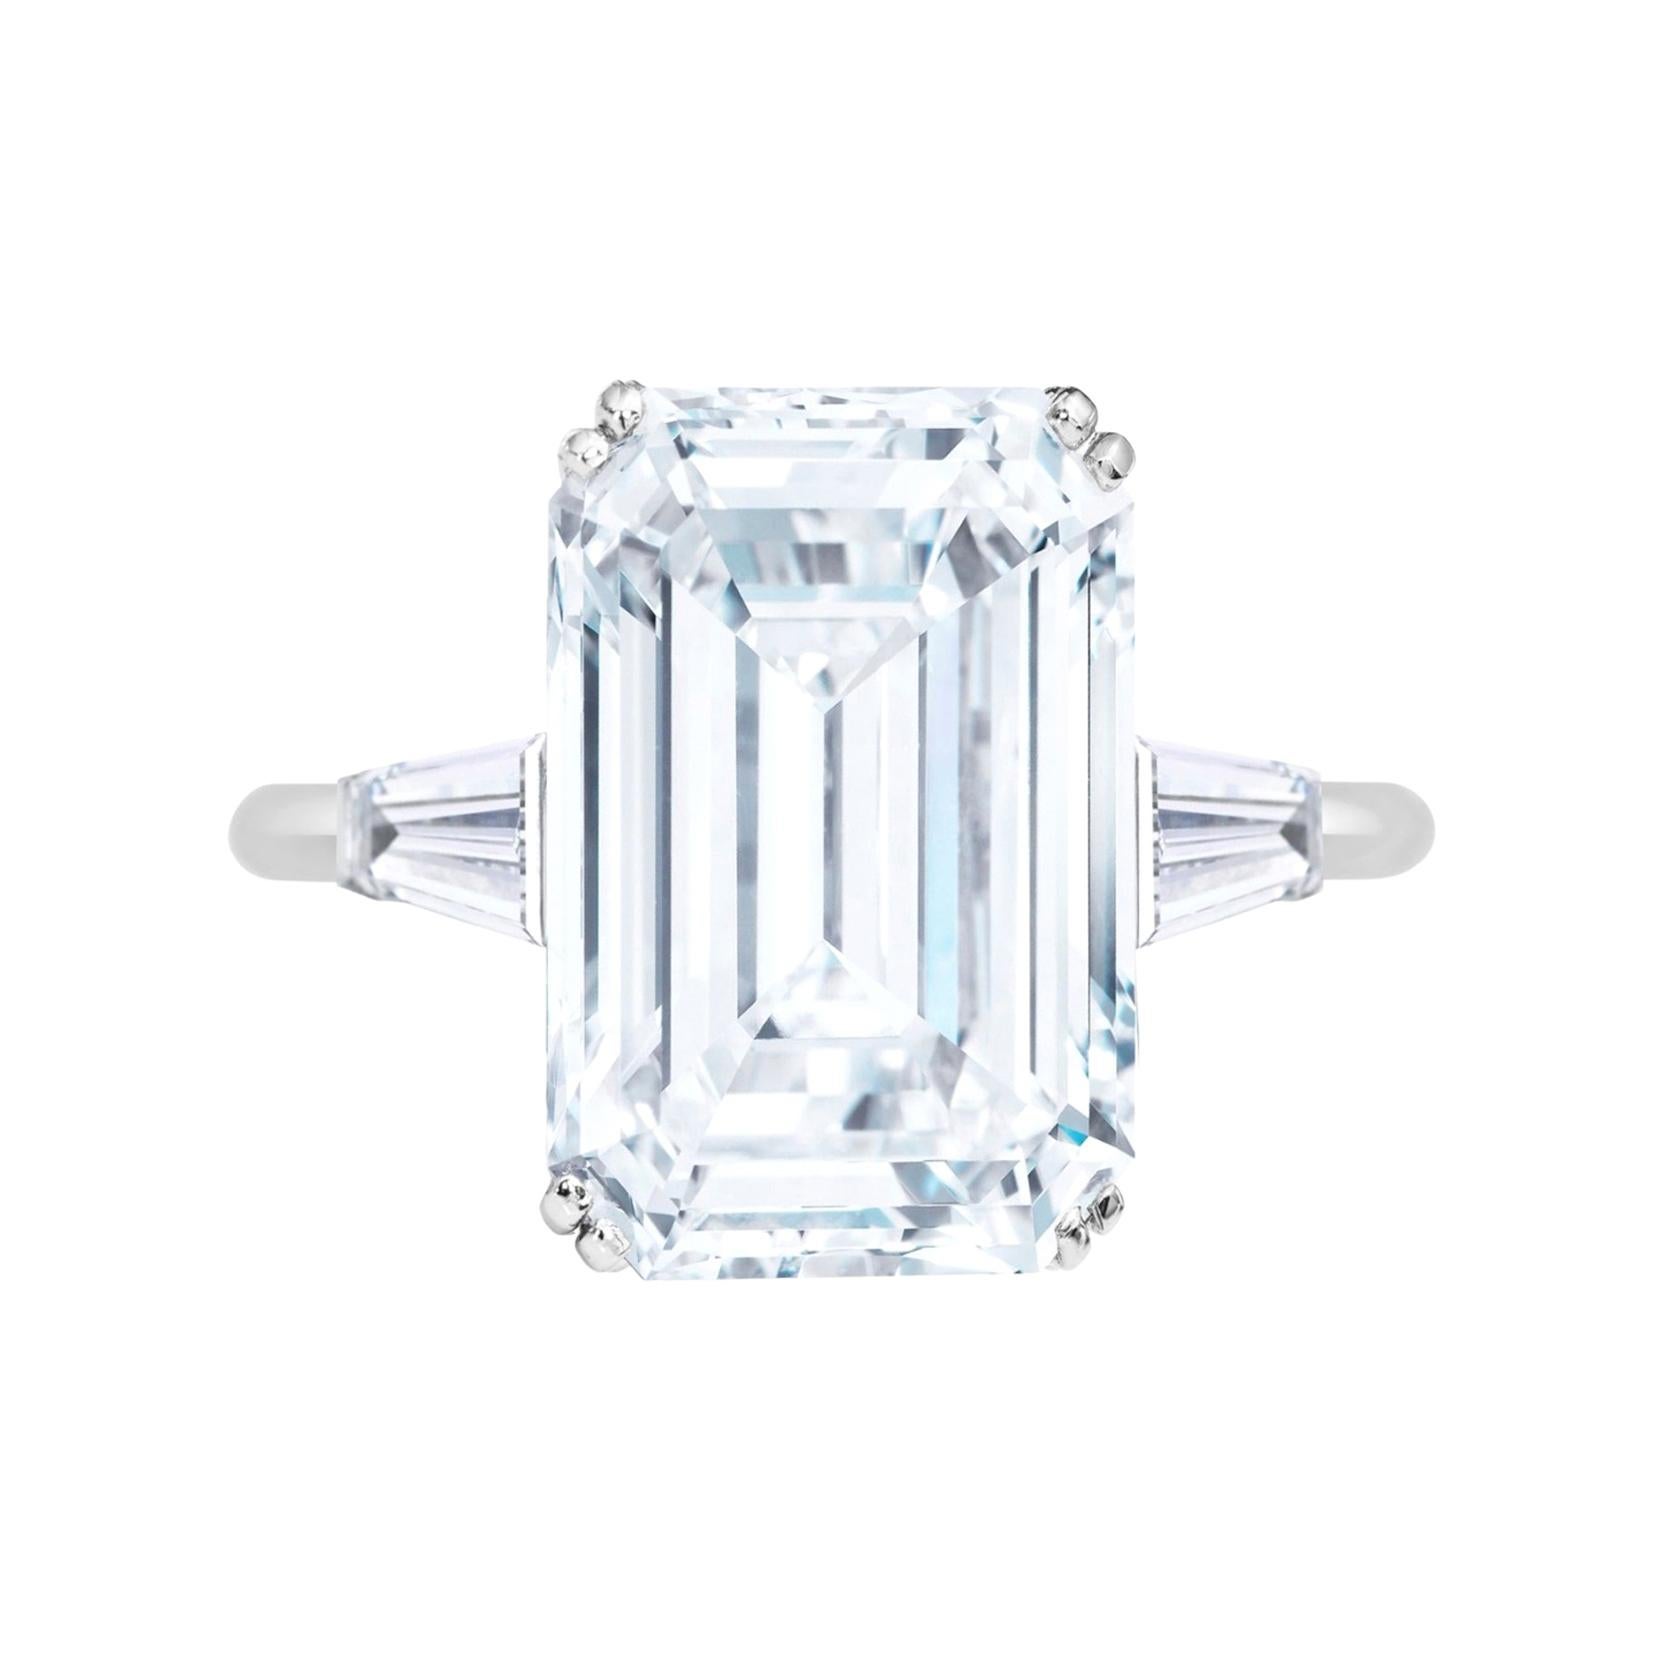 Flawless D Color GIA Certified 4 Carat Emerald Cut Platinum Ring 